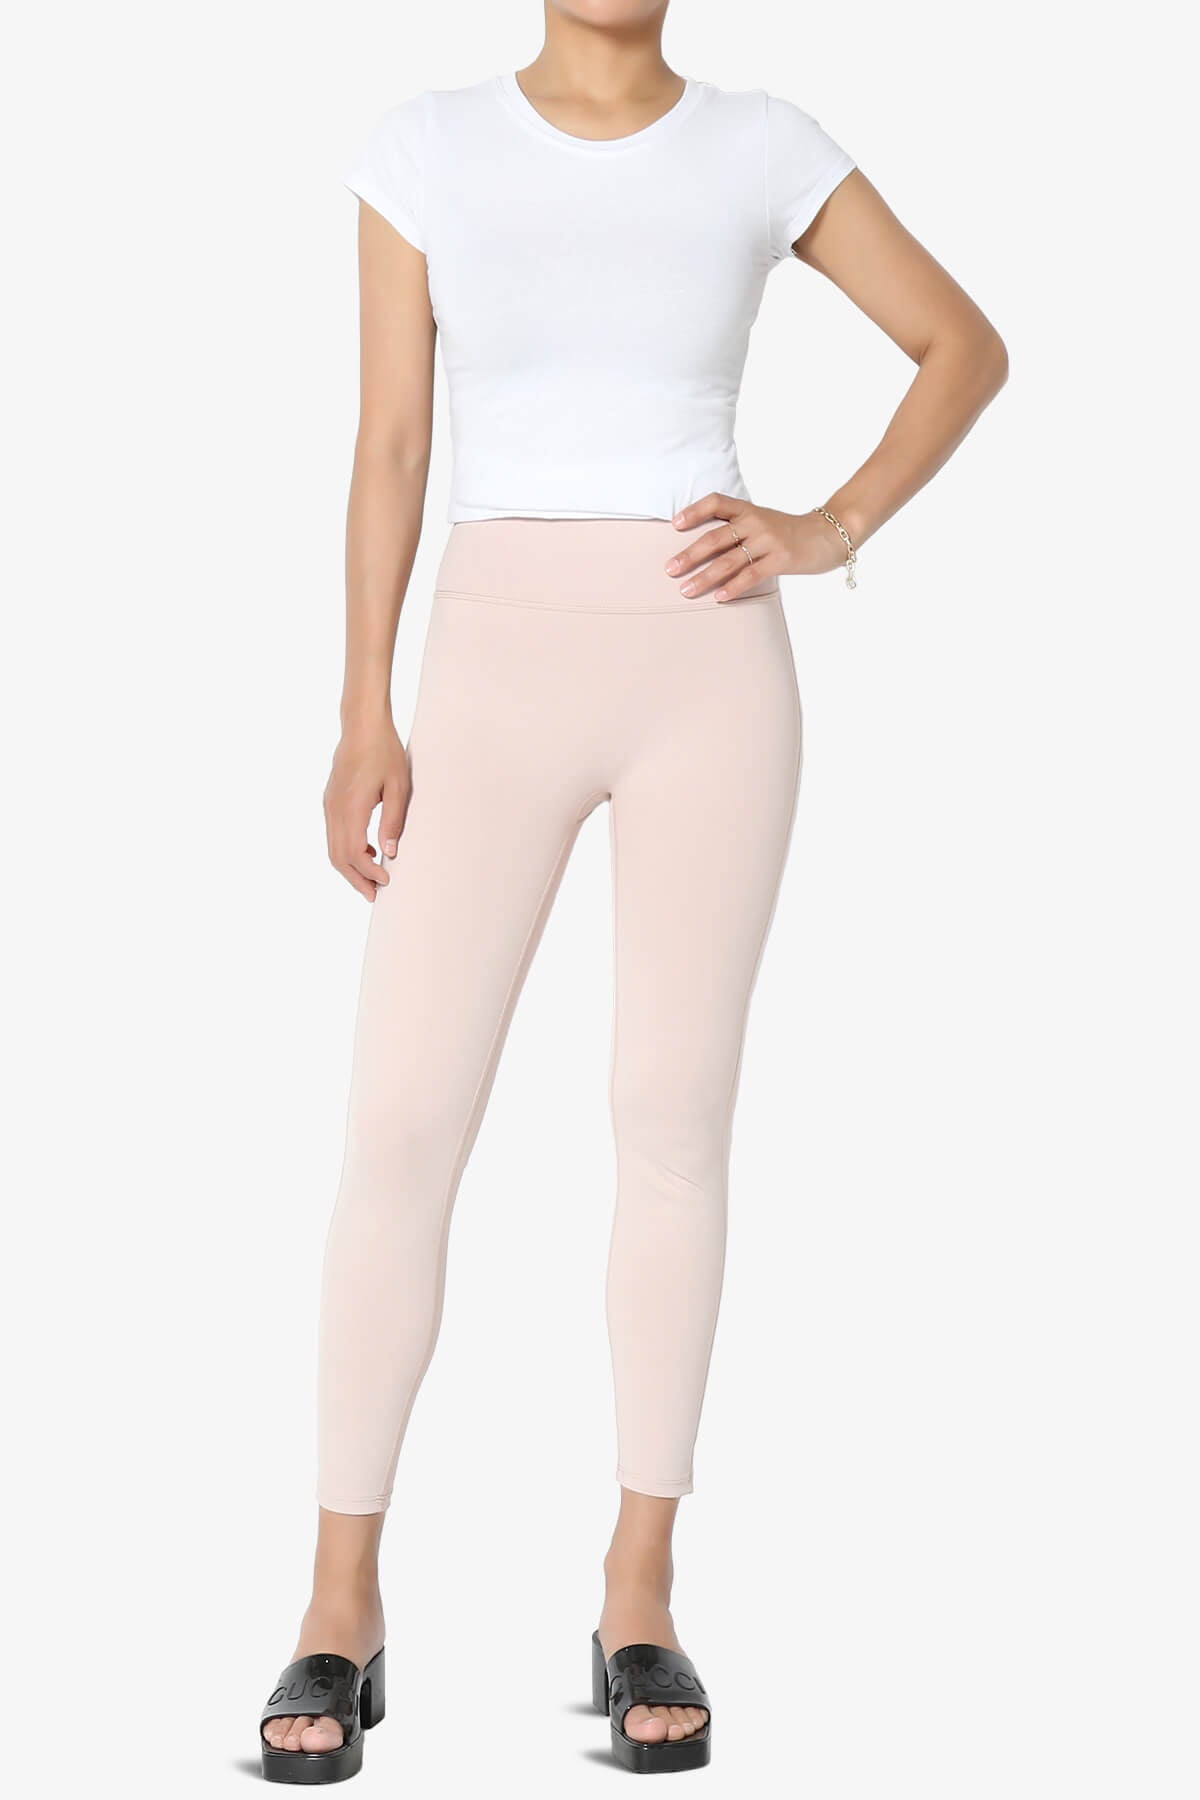 Load image into Gallery viewer, Mosco Athletic Tummy Control Workout Leggings DUSTY BLUSH_6
